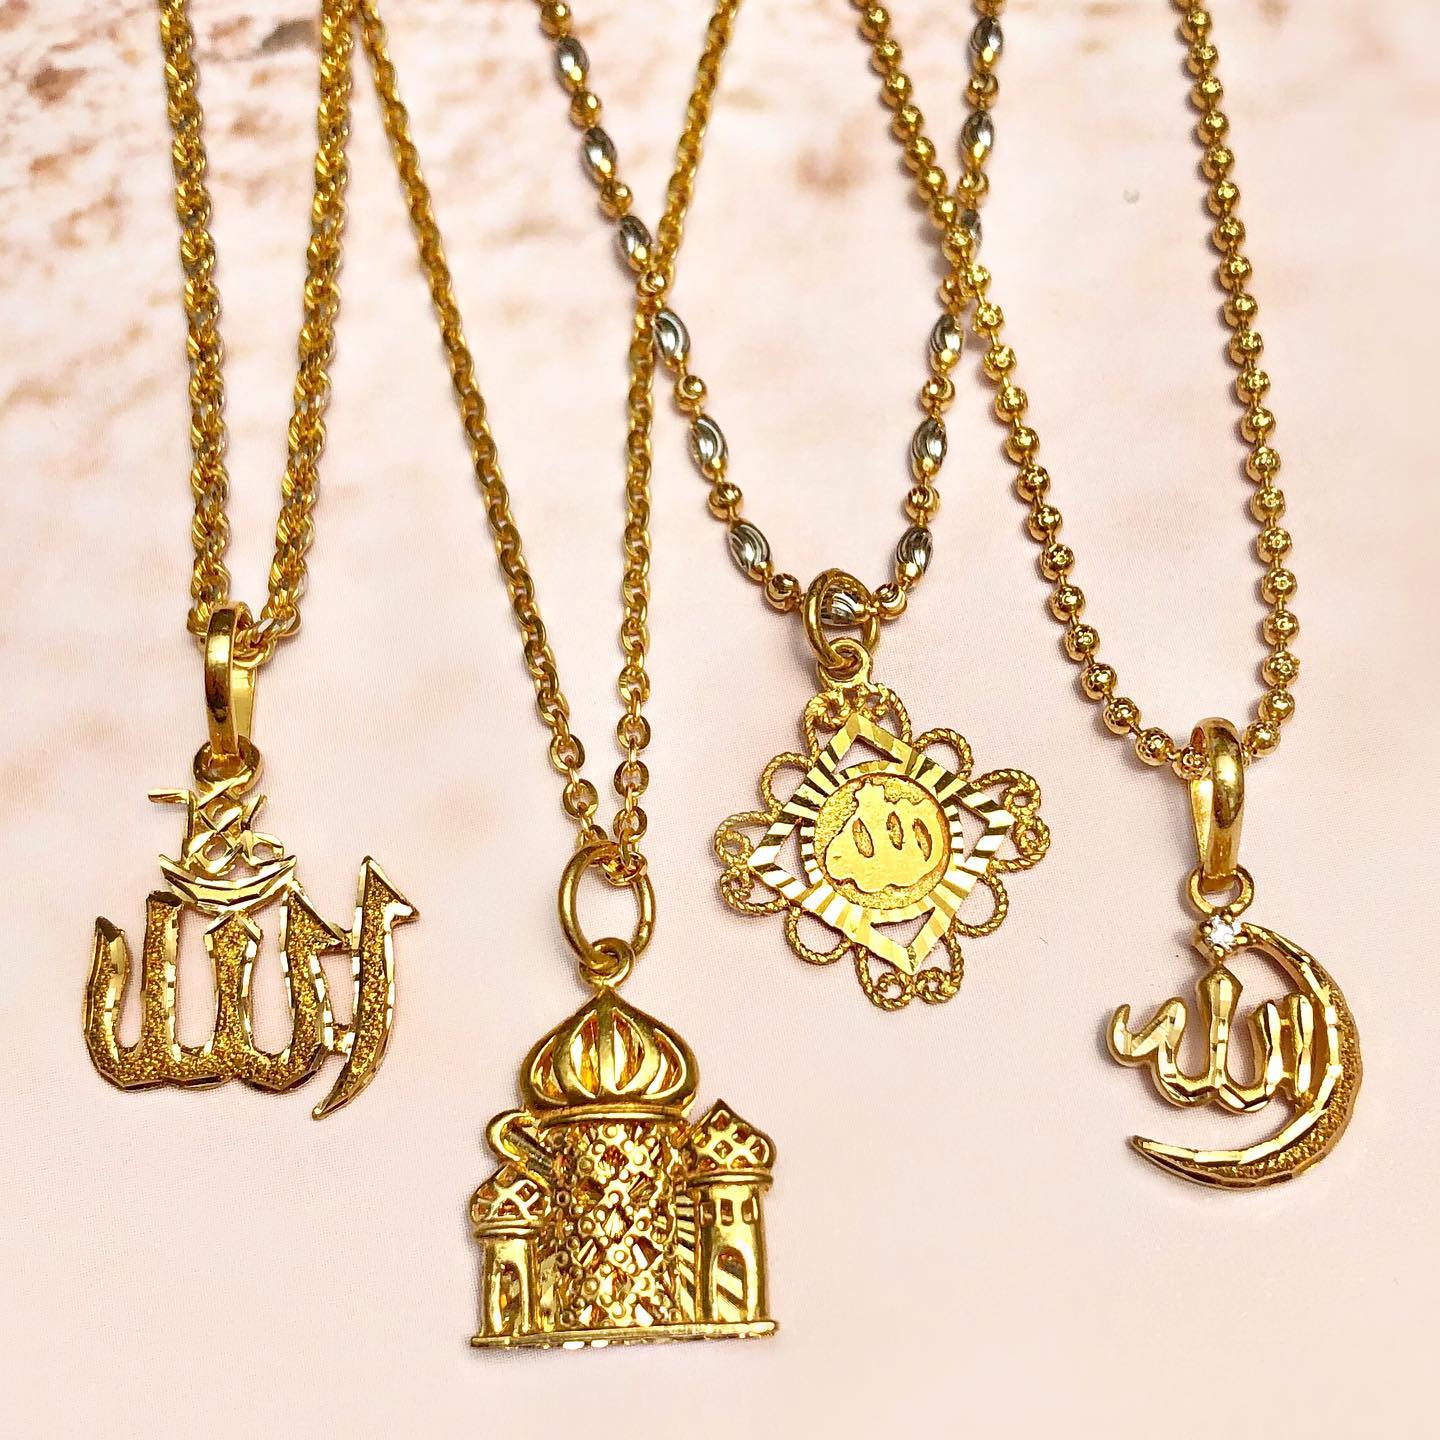 Symbols Of Faith: The Meaning Behind Religious Jewelry